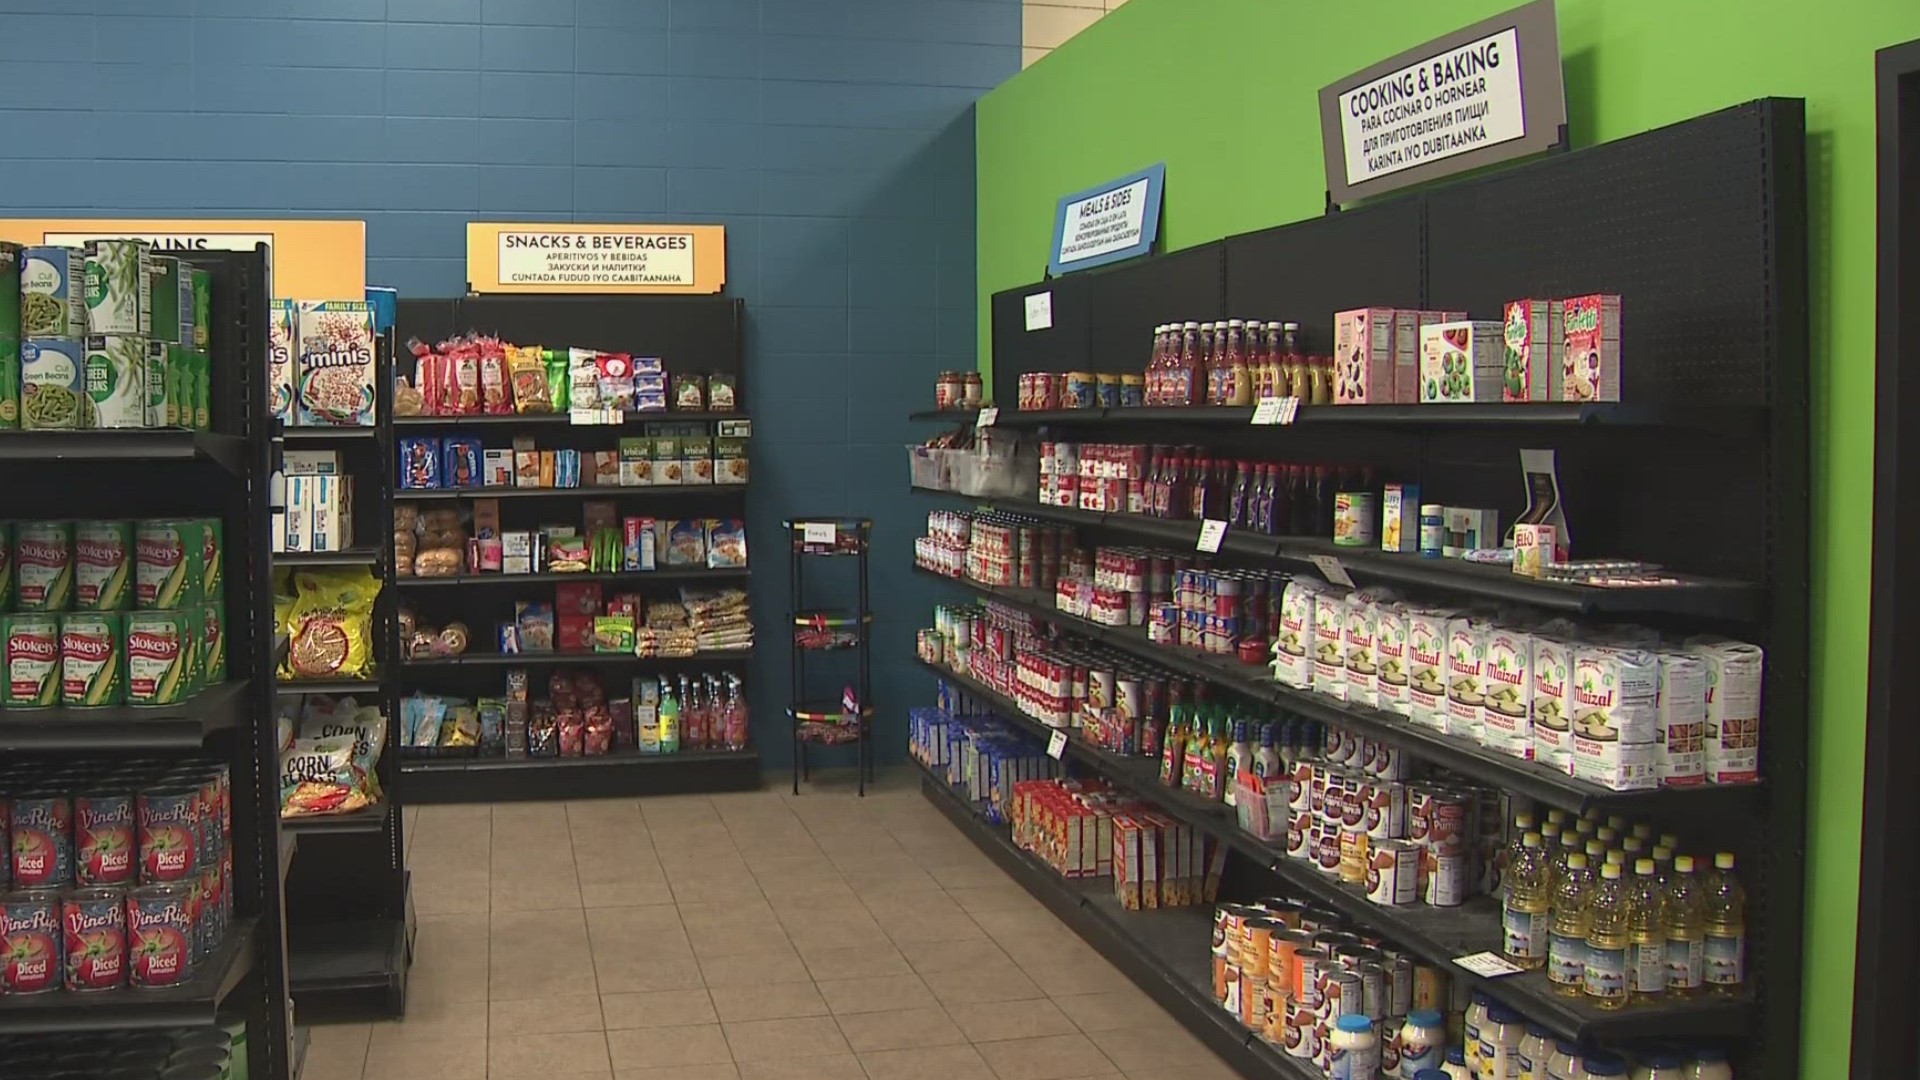 Hunger Solutions Minnesota says there were 7.5 million visits last year, a 32% increase from 2022.